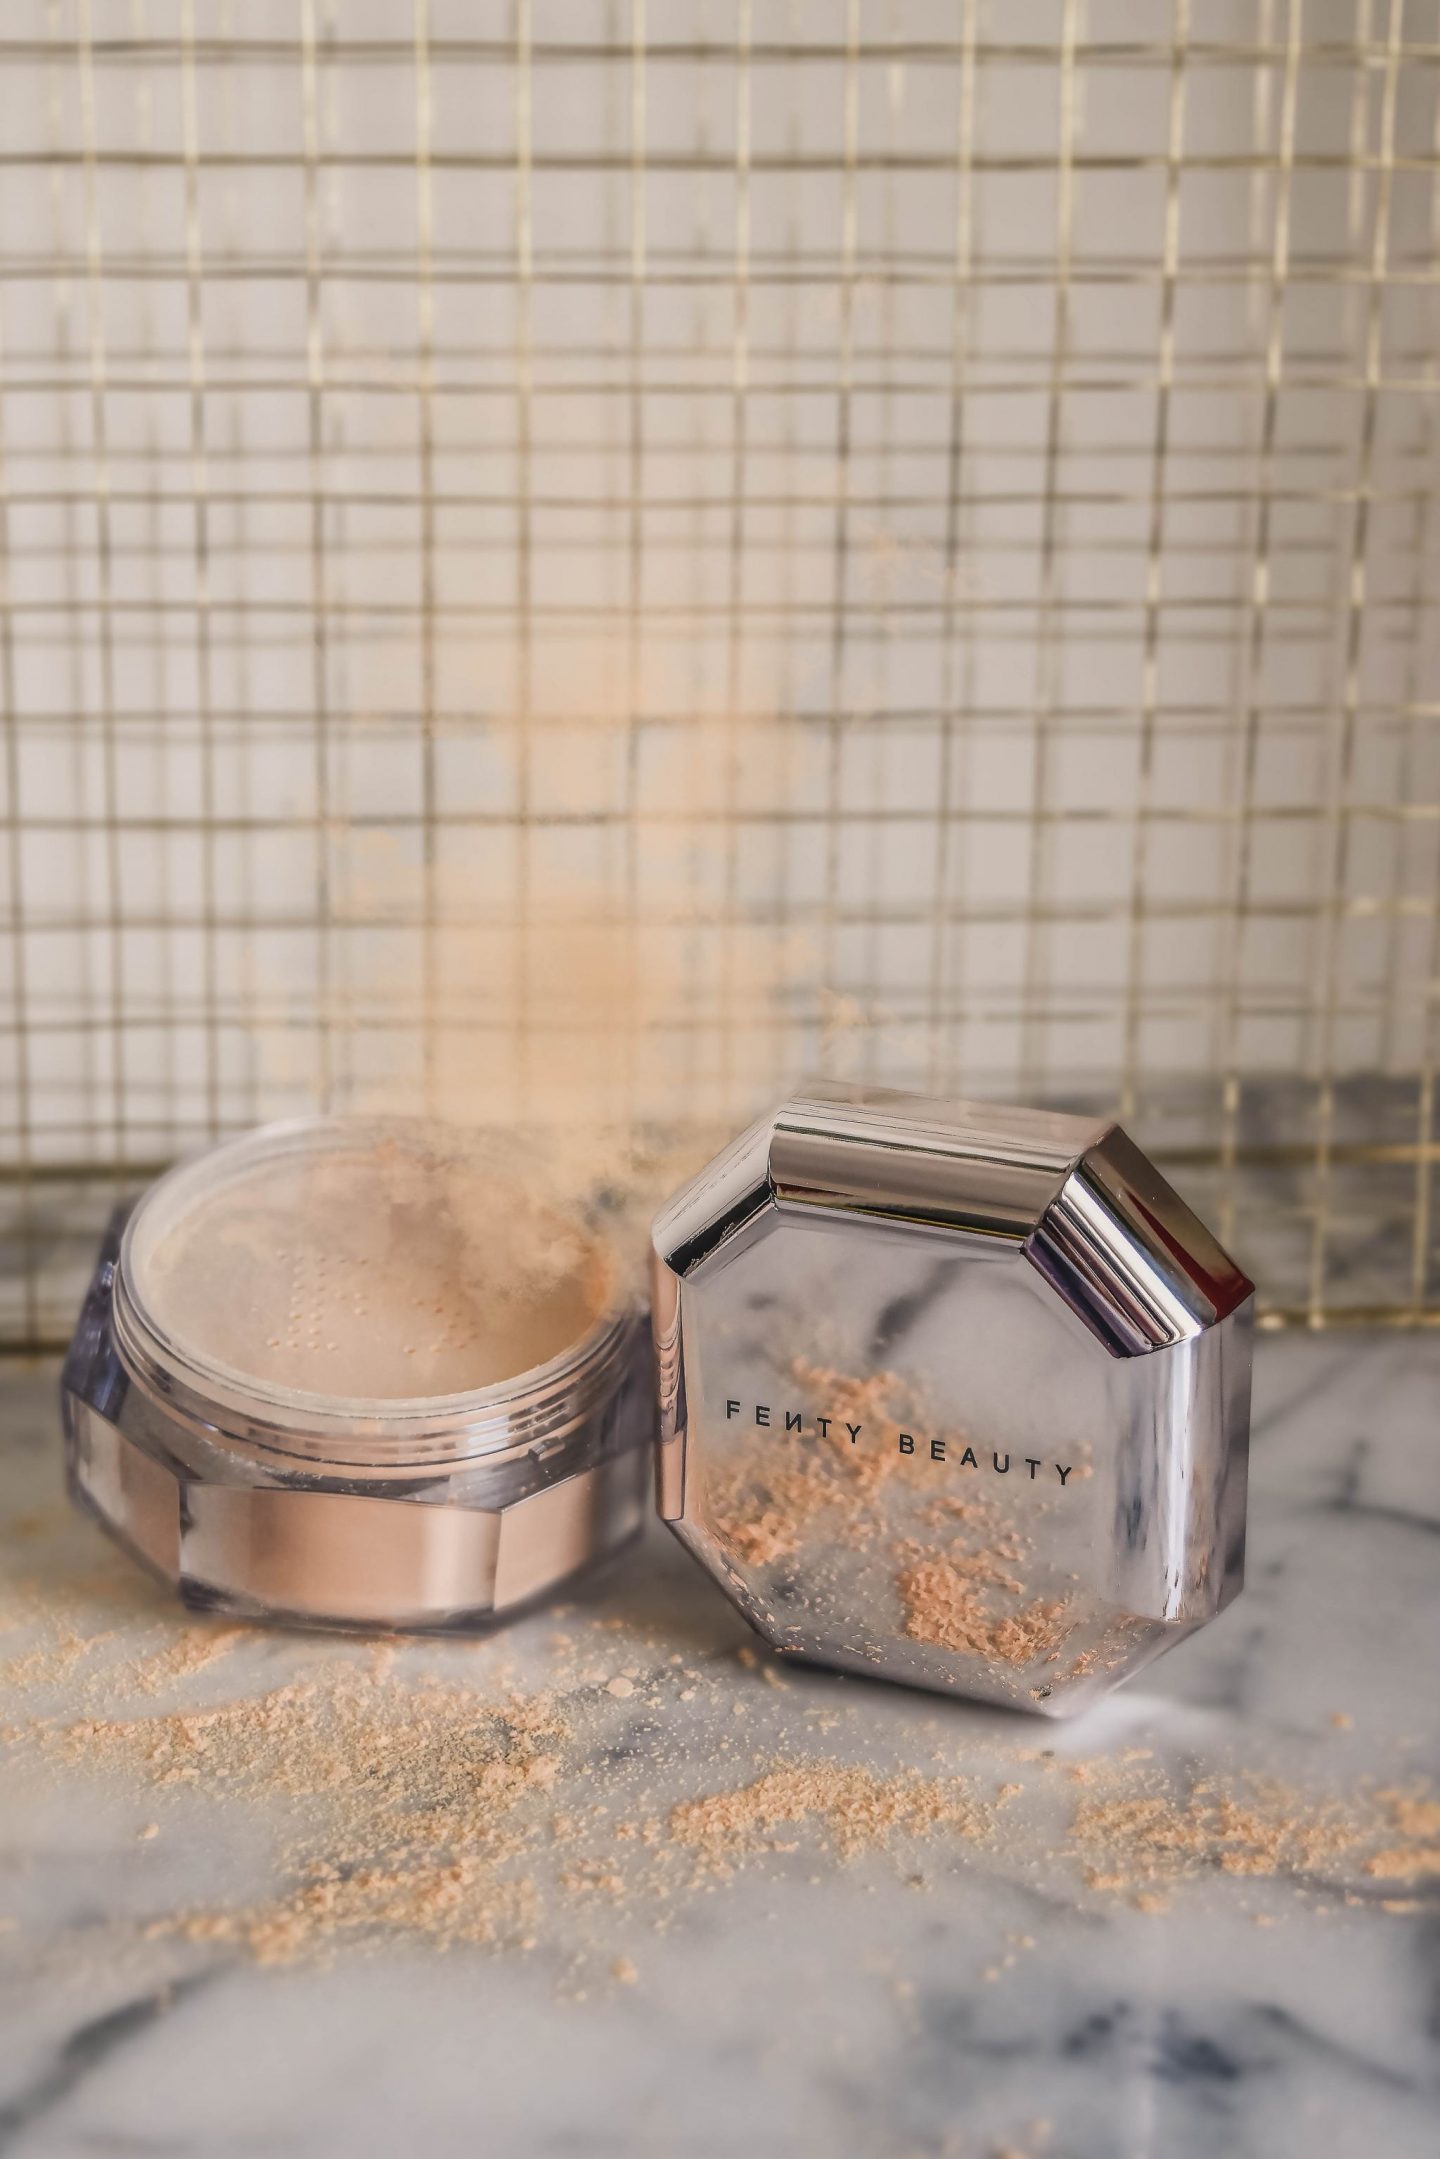 Fenty Beauty Pro Filt'r Instant Retouch Setting Powder - «Blurring setting  powder that filters your skin like Instagram in the shade Butter. »